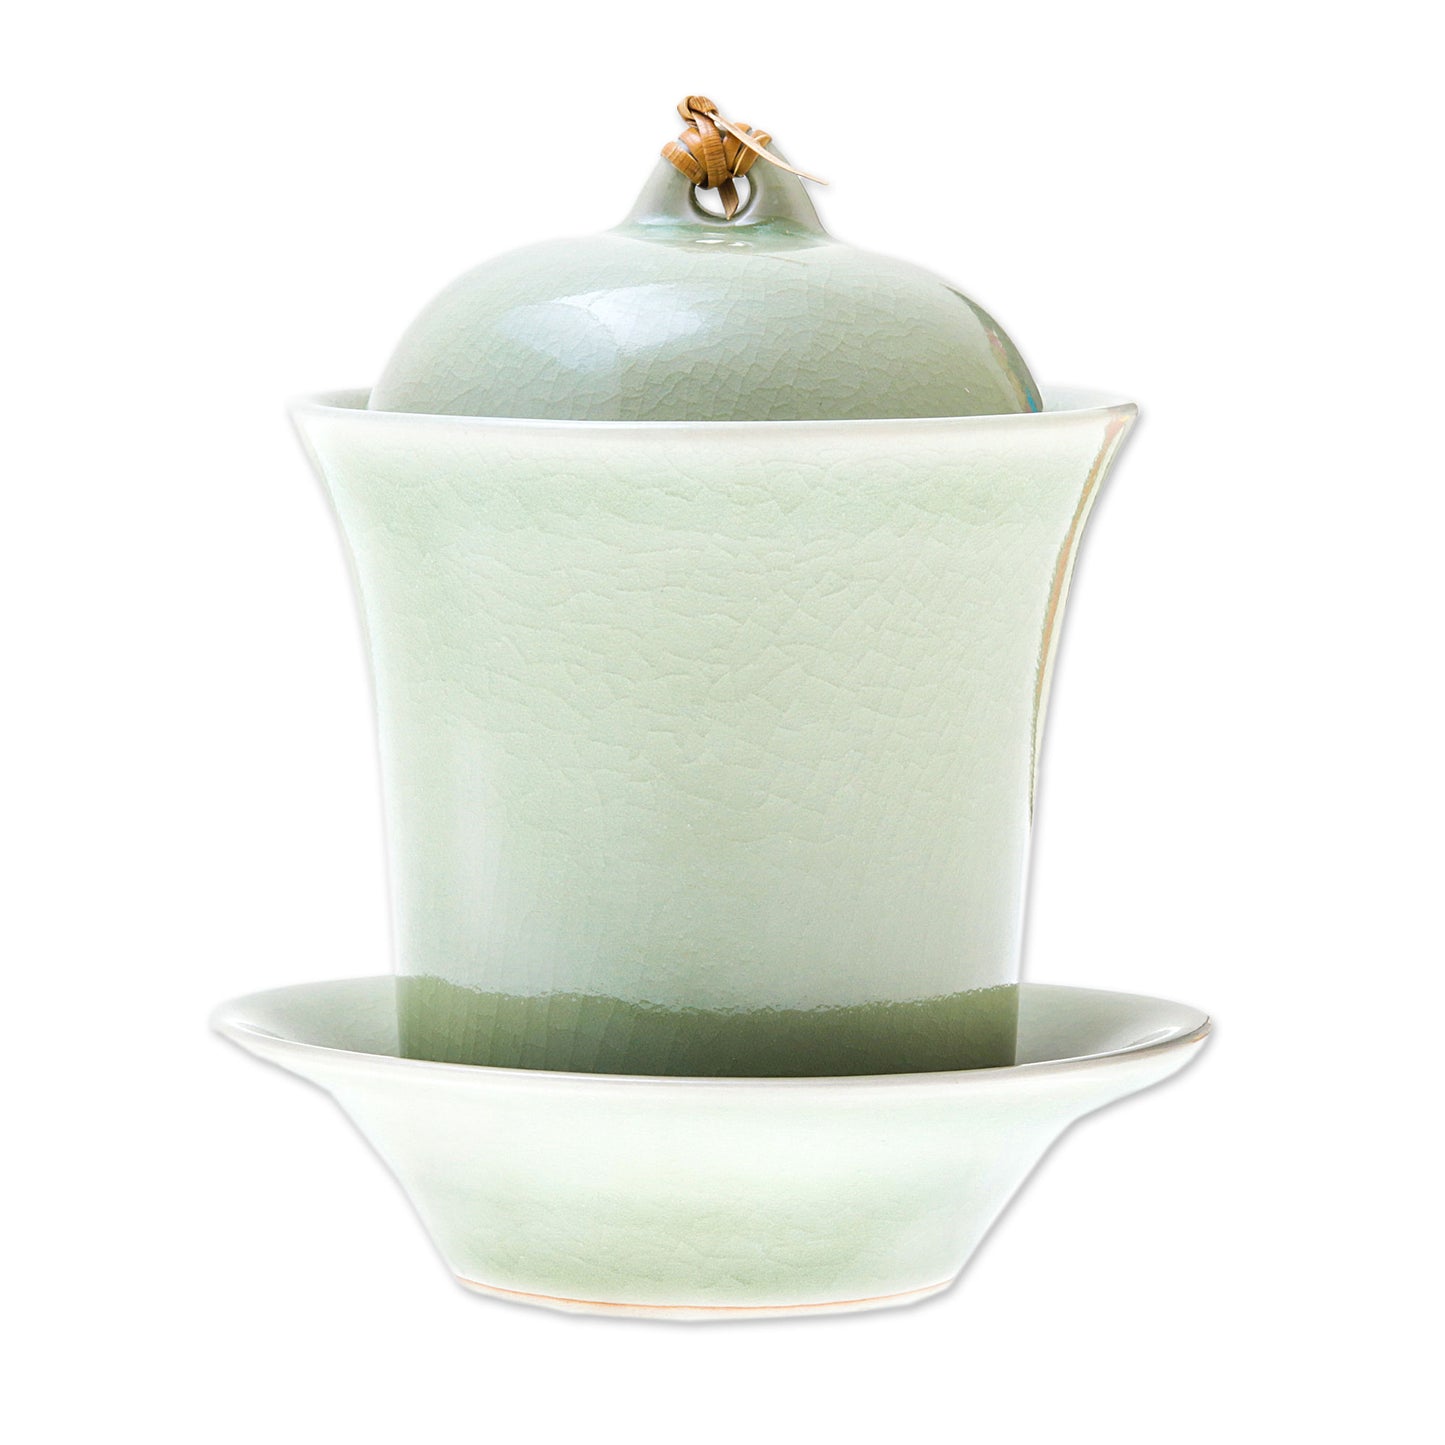 Cup of Comfort in Green Handcrafted Celadon Green Ceramic Soup Cup Lid Saucer Set